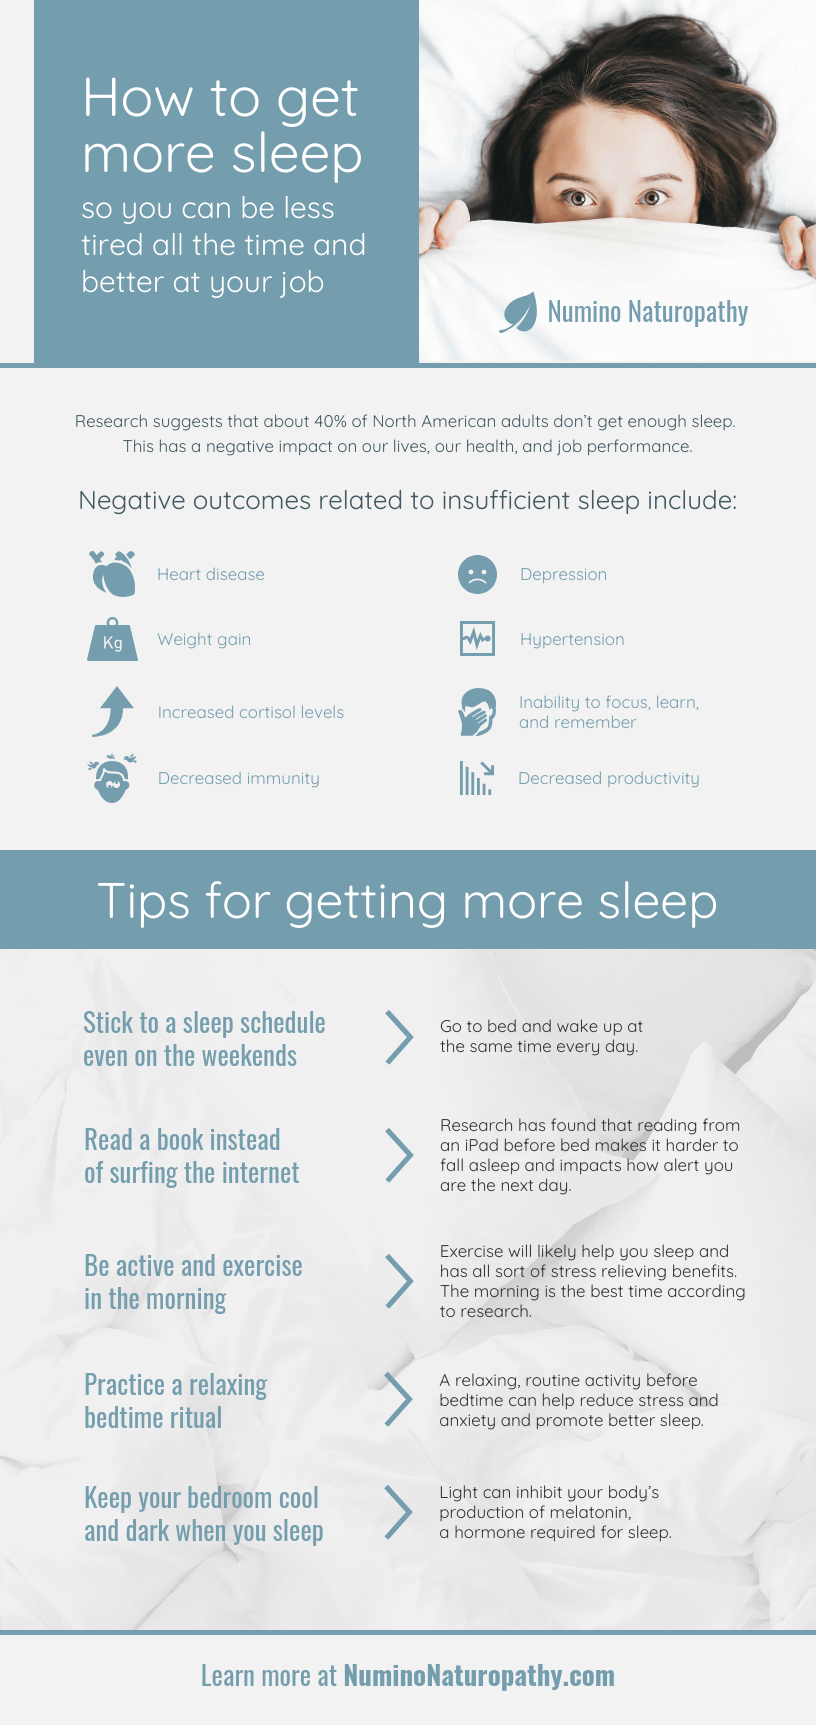 Hamilton infographic marketing agencies like SociallyInfused Media can design informational images for your marketing campaigns. See this 'How to get more sleep' infographic.